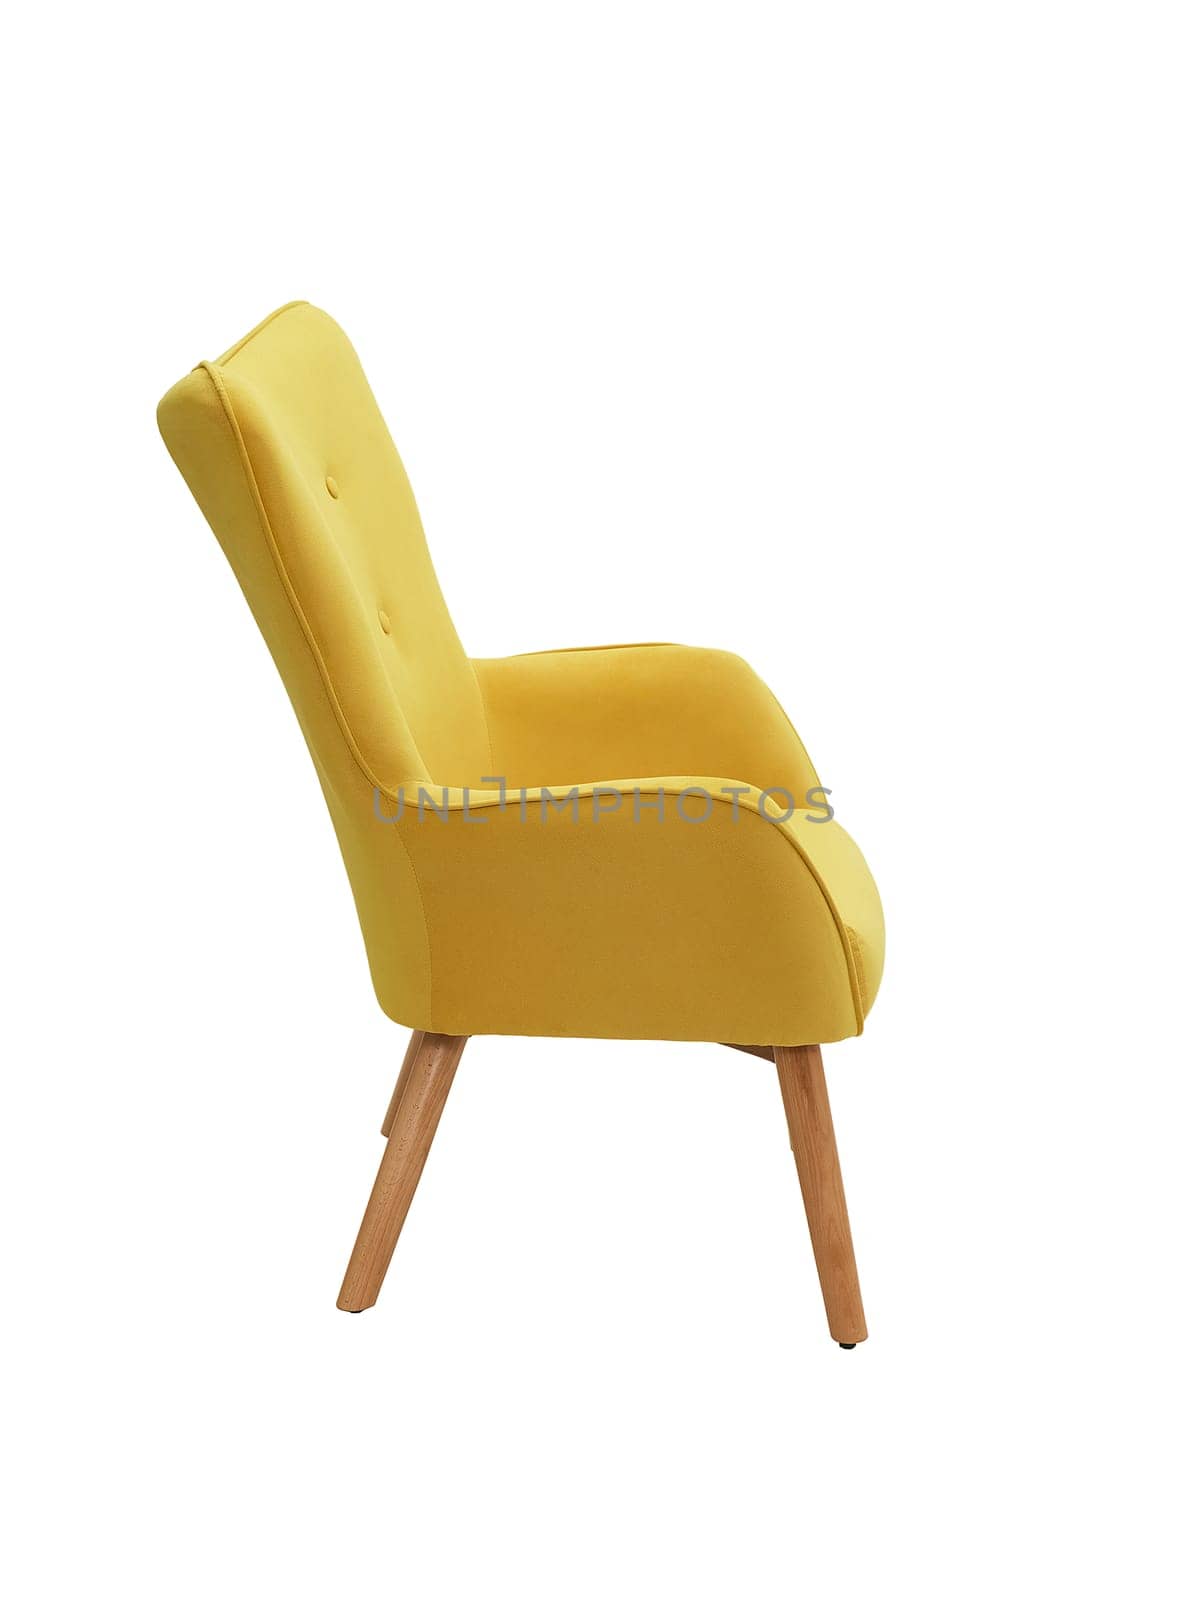 modern yellow fabric armchair with wooden legs isolated on white background, side view